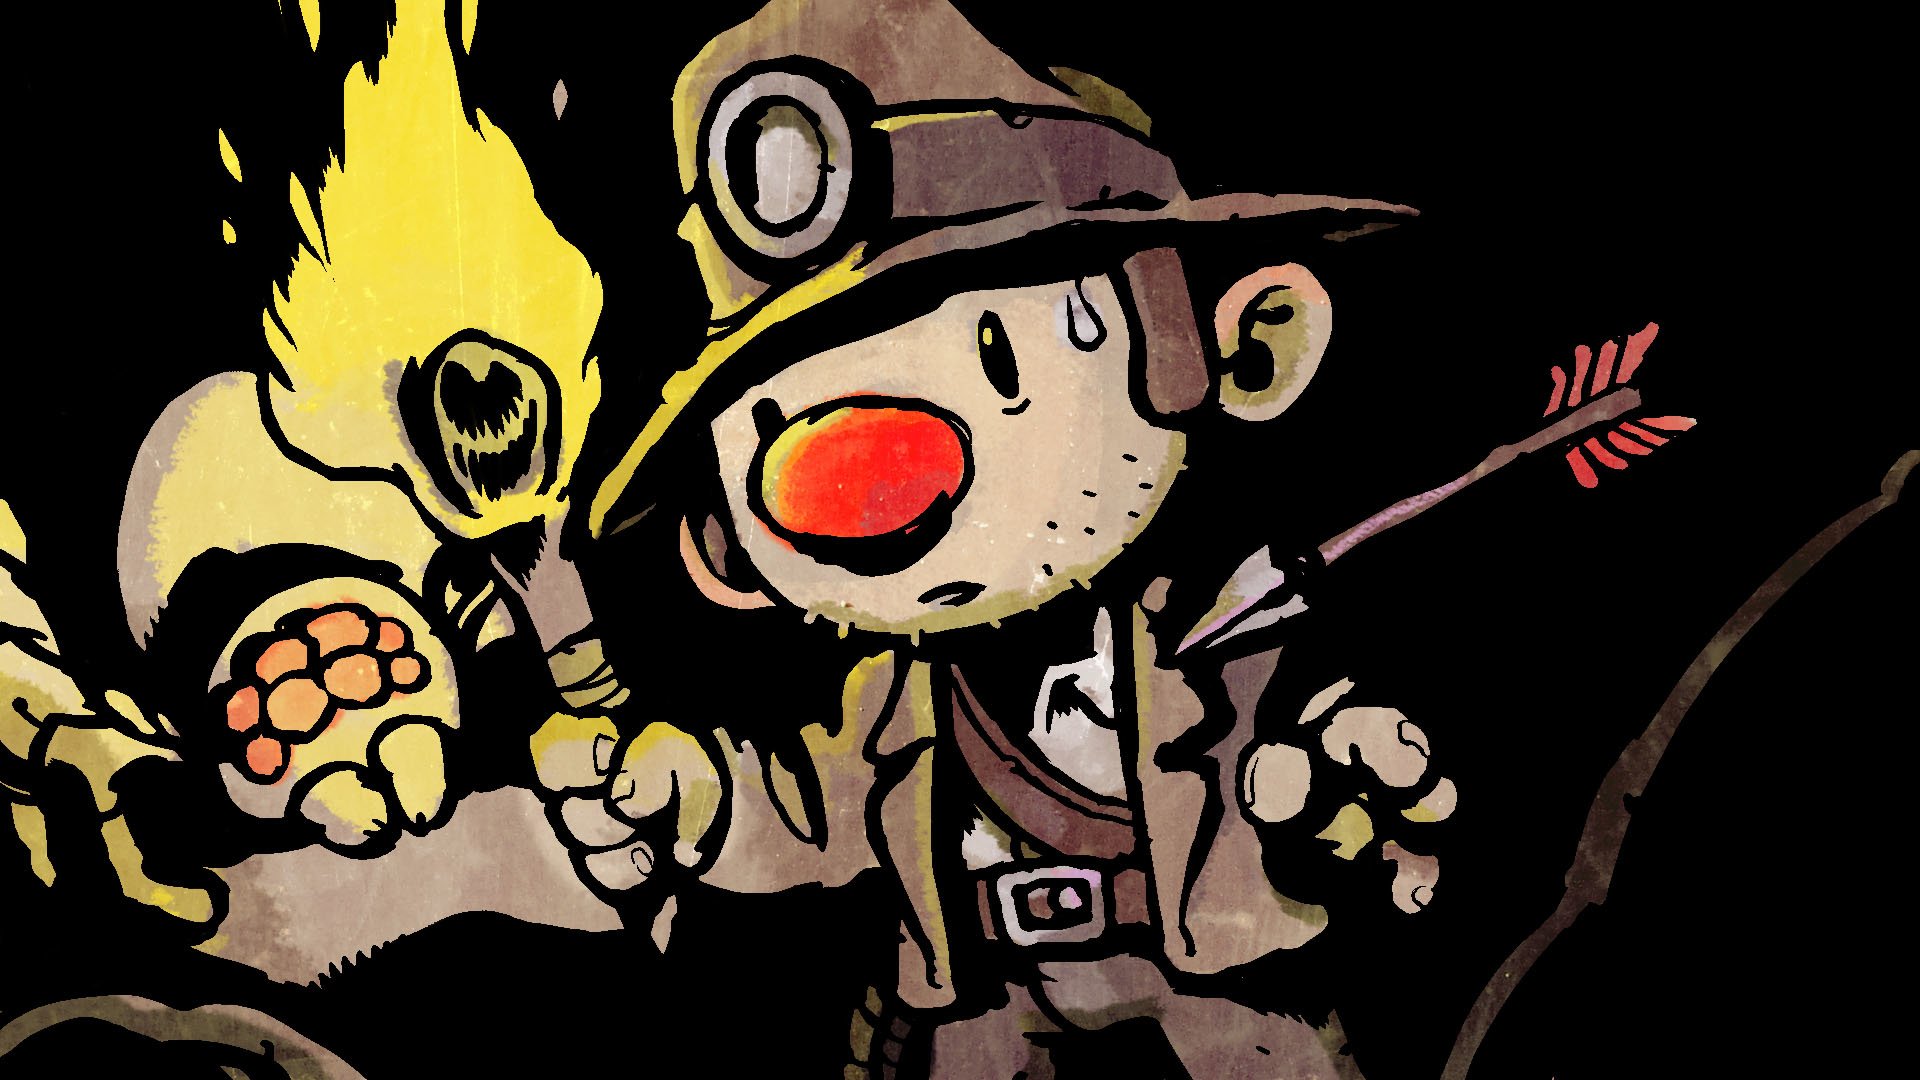 Spelunky HD Wallpaper Background Image